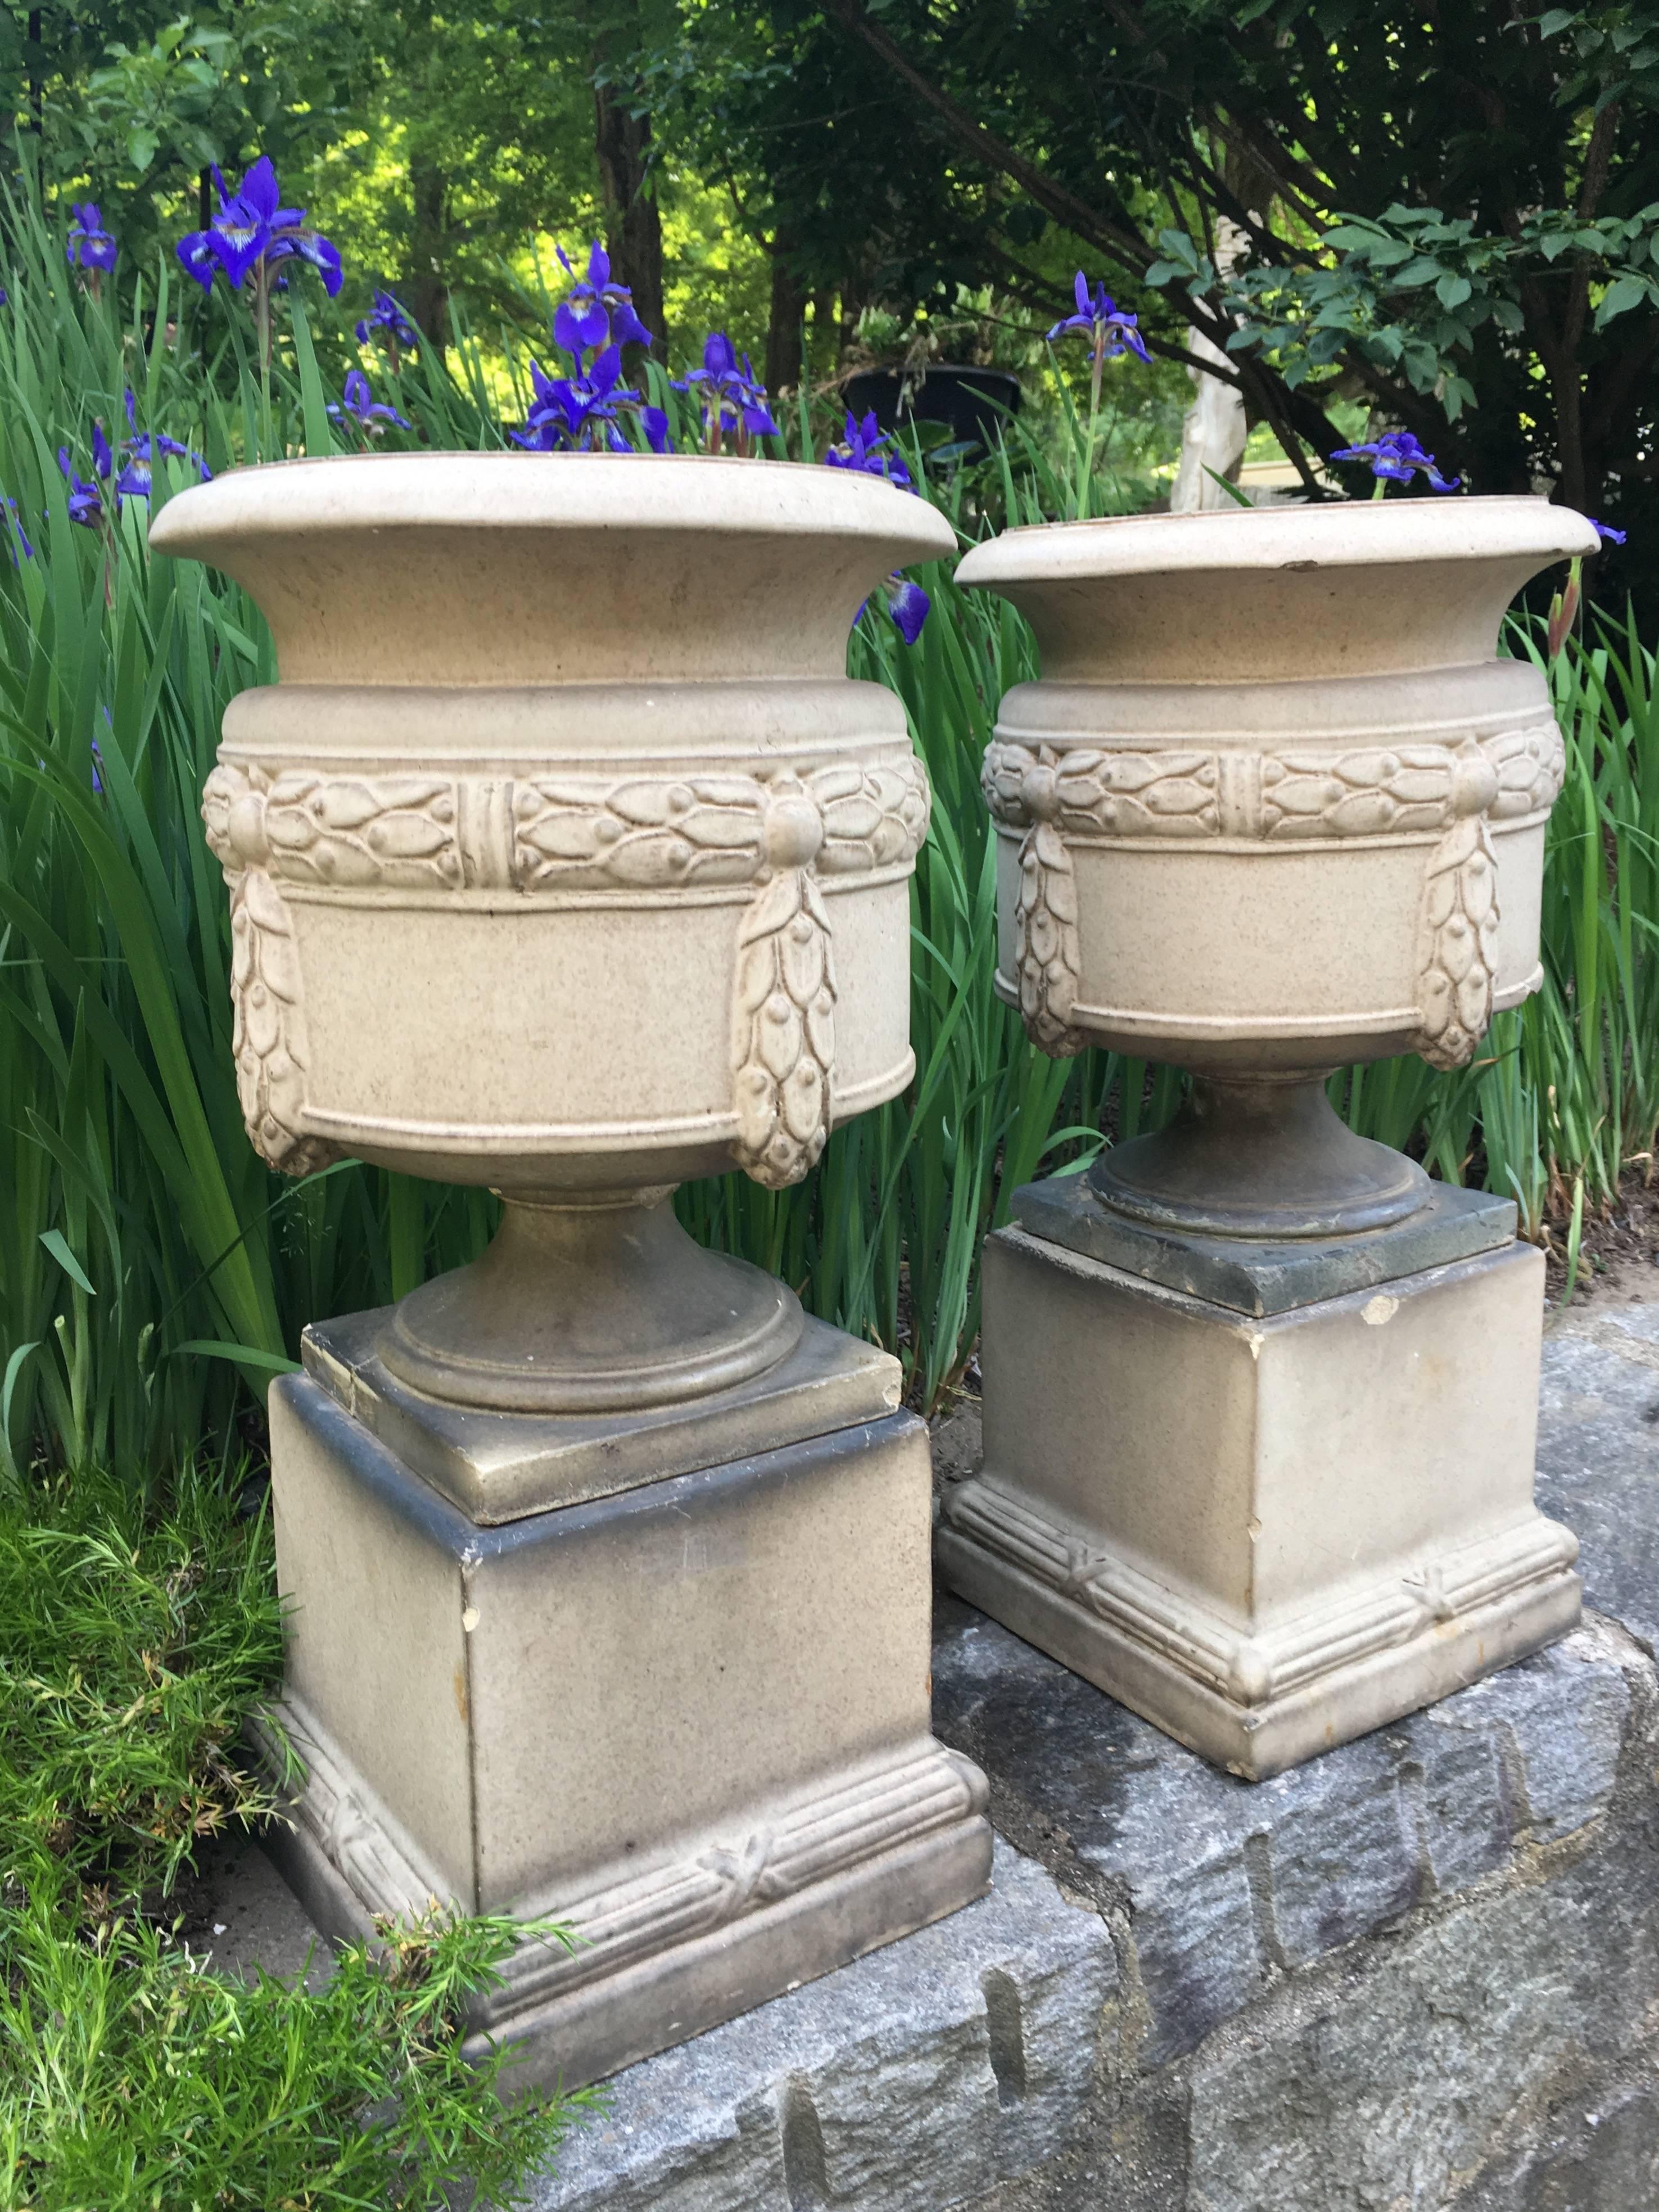 English Rare Pair of Fireclay Urns on Plinths, Signed LEFCO